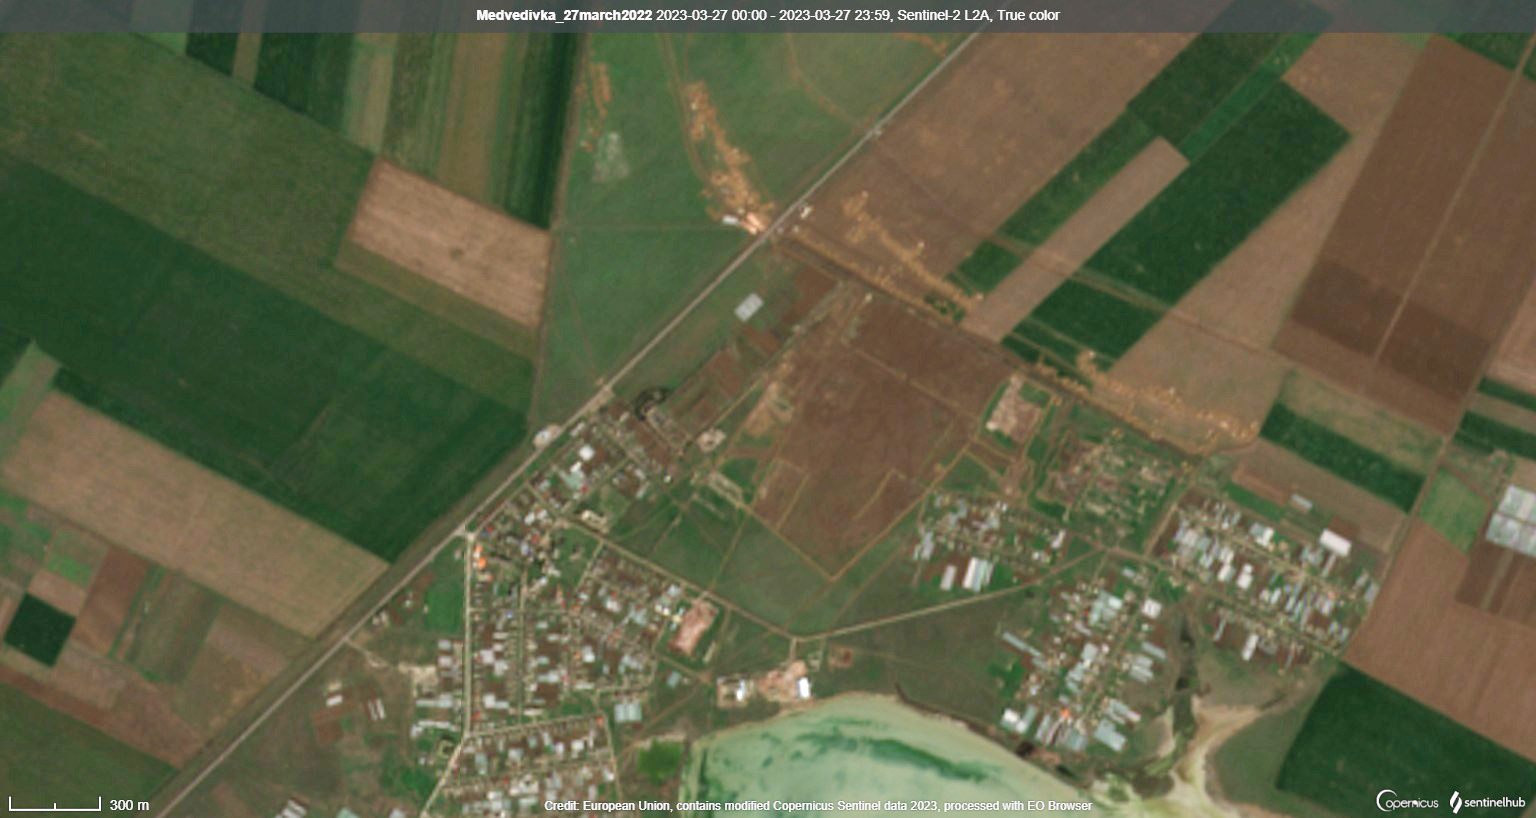 The base at Medvedivka seen from above on March 27.